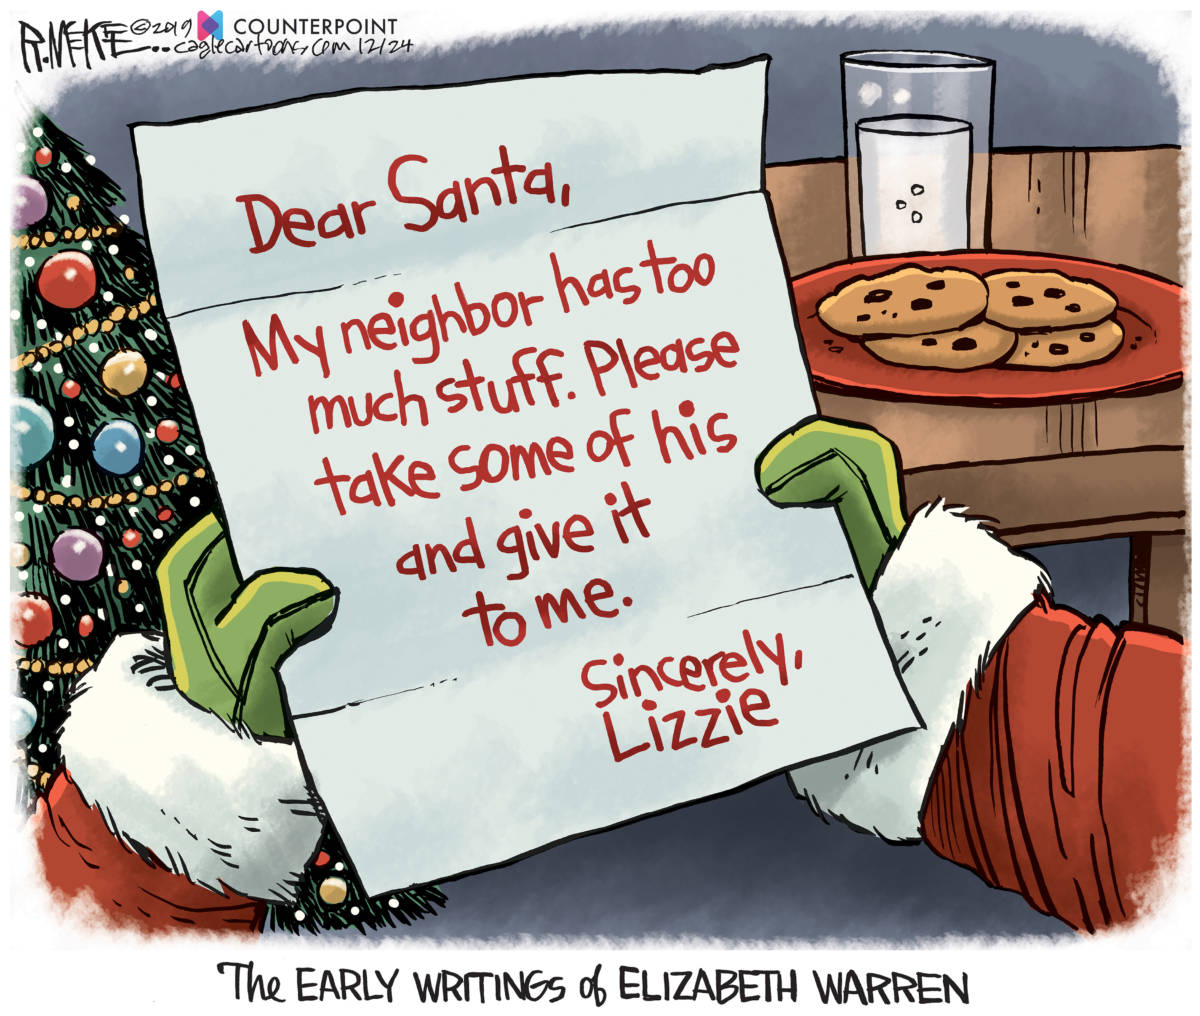 Warren Writings by Rick McKee, Counterpoint